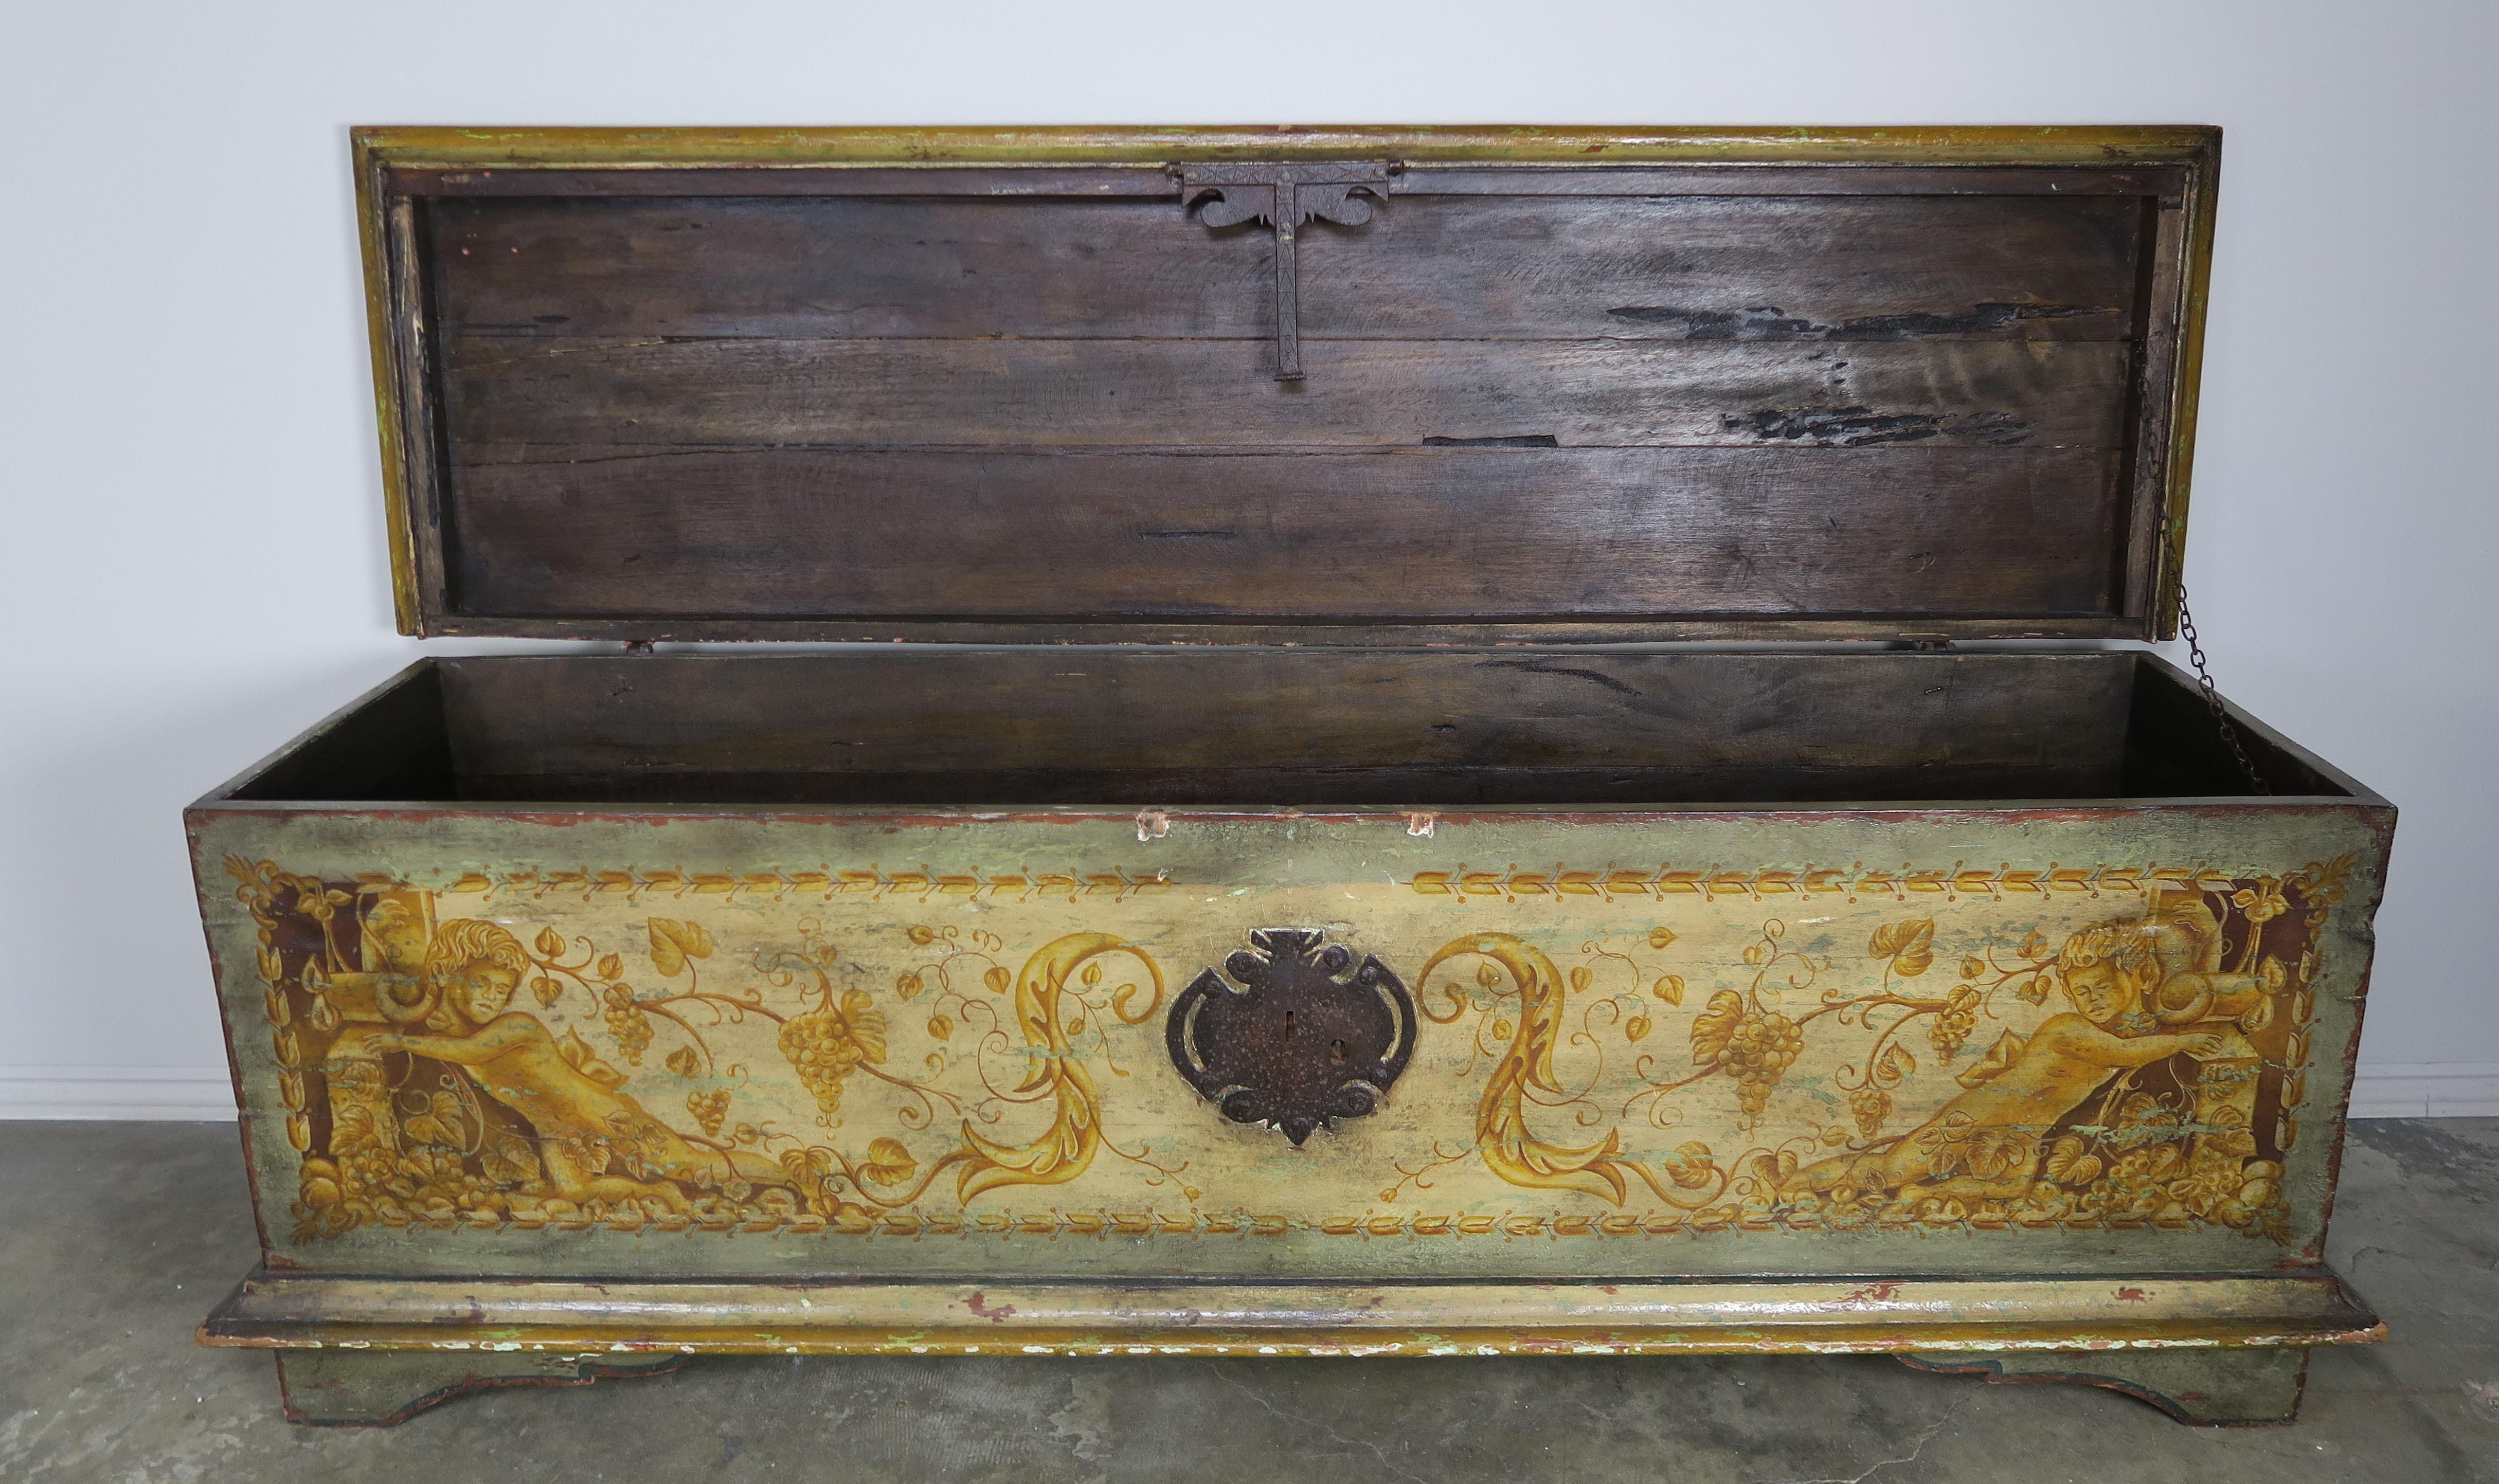 19th century Italian hand painted chest depicting a pair of cherubs leaning against a pair of torcheres and surrounded by flowers and swirling acanthus leaves throughout. Original hand wrought iron hardware.